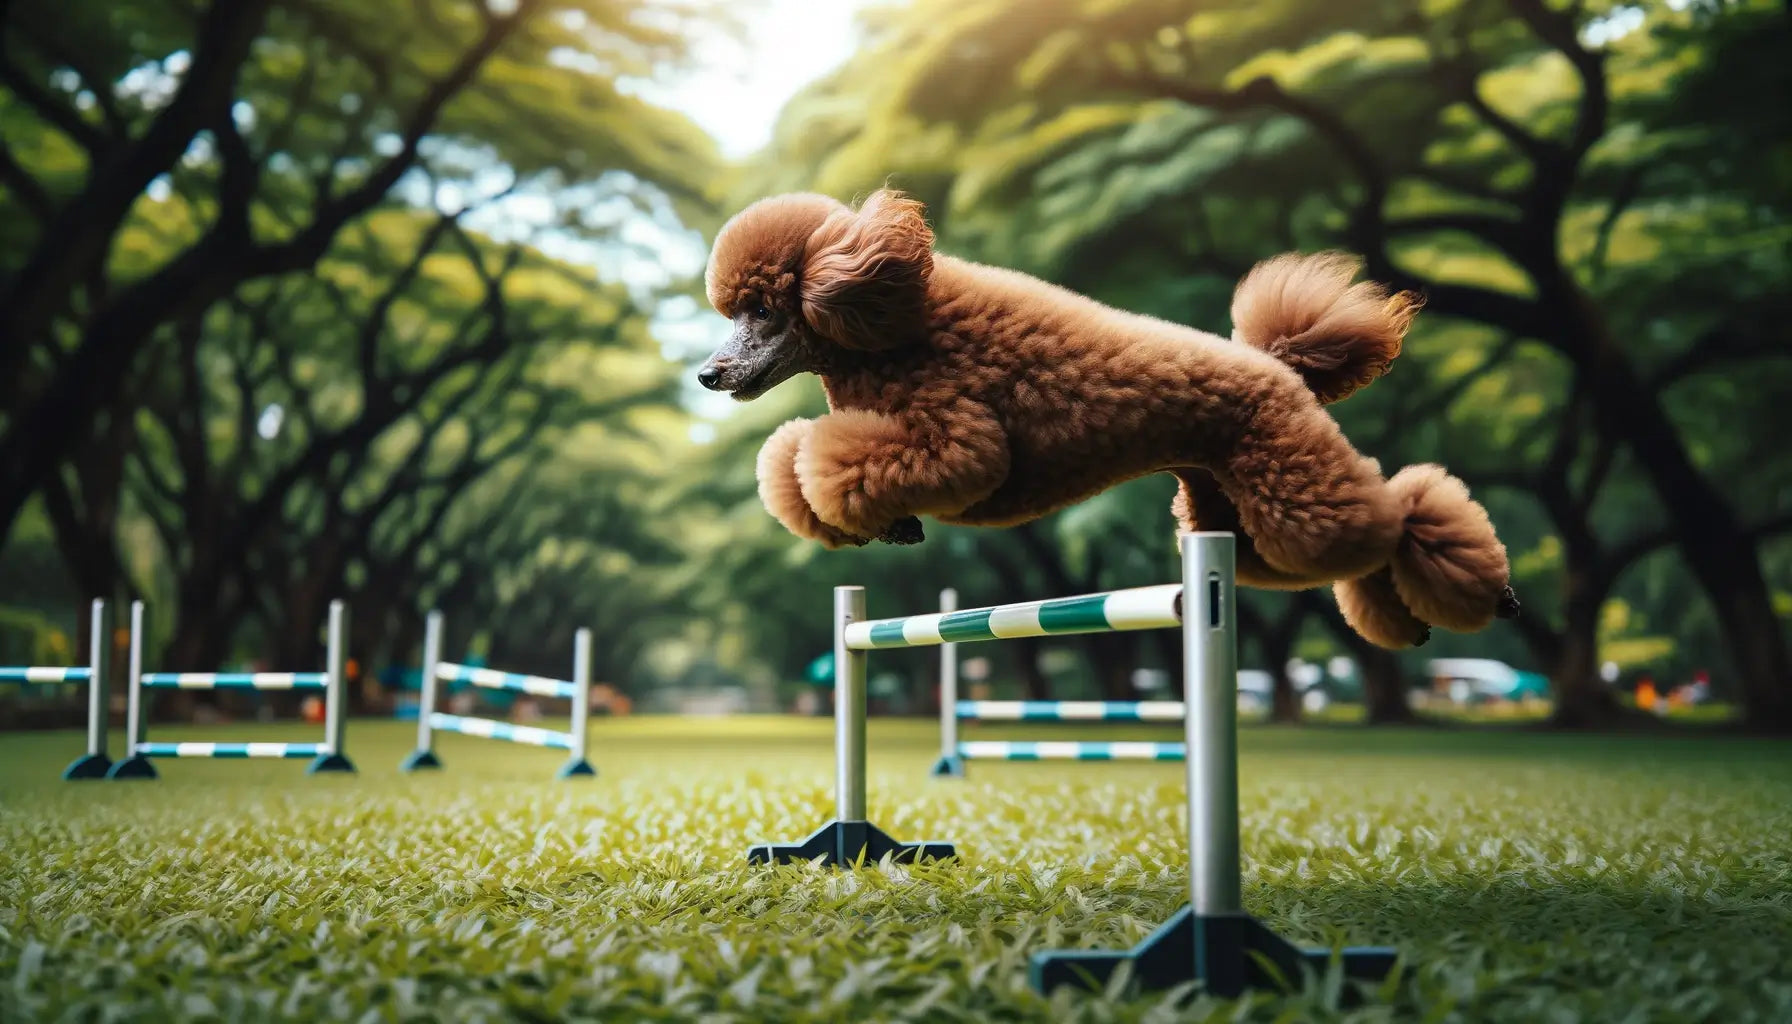 A brown Poodle leaping over a hurdle in a park setting, showcasing its athleticism and training.